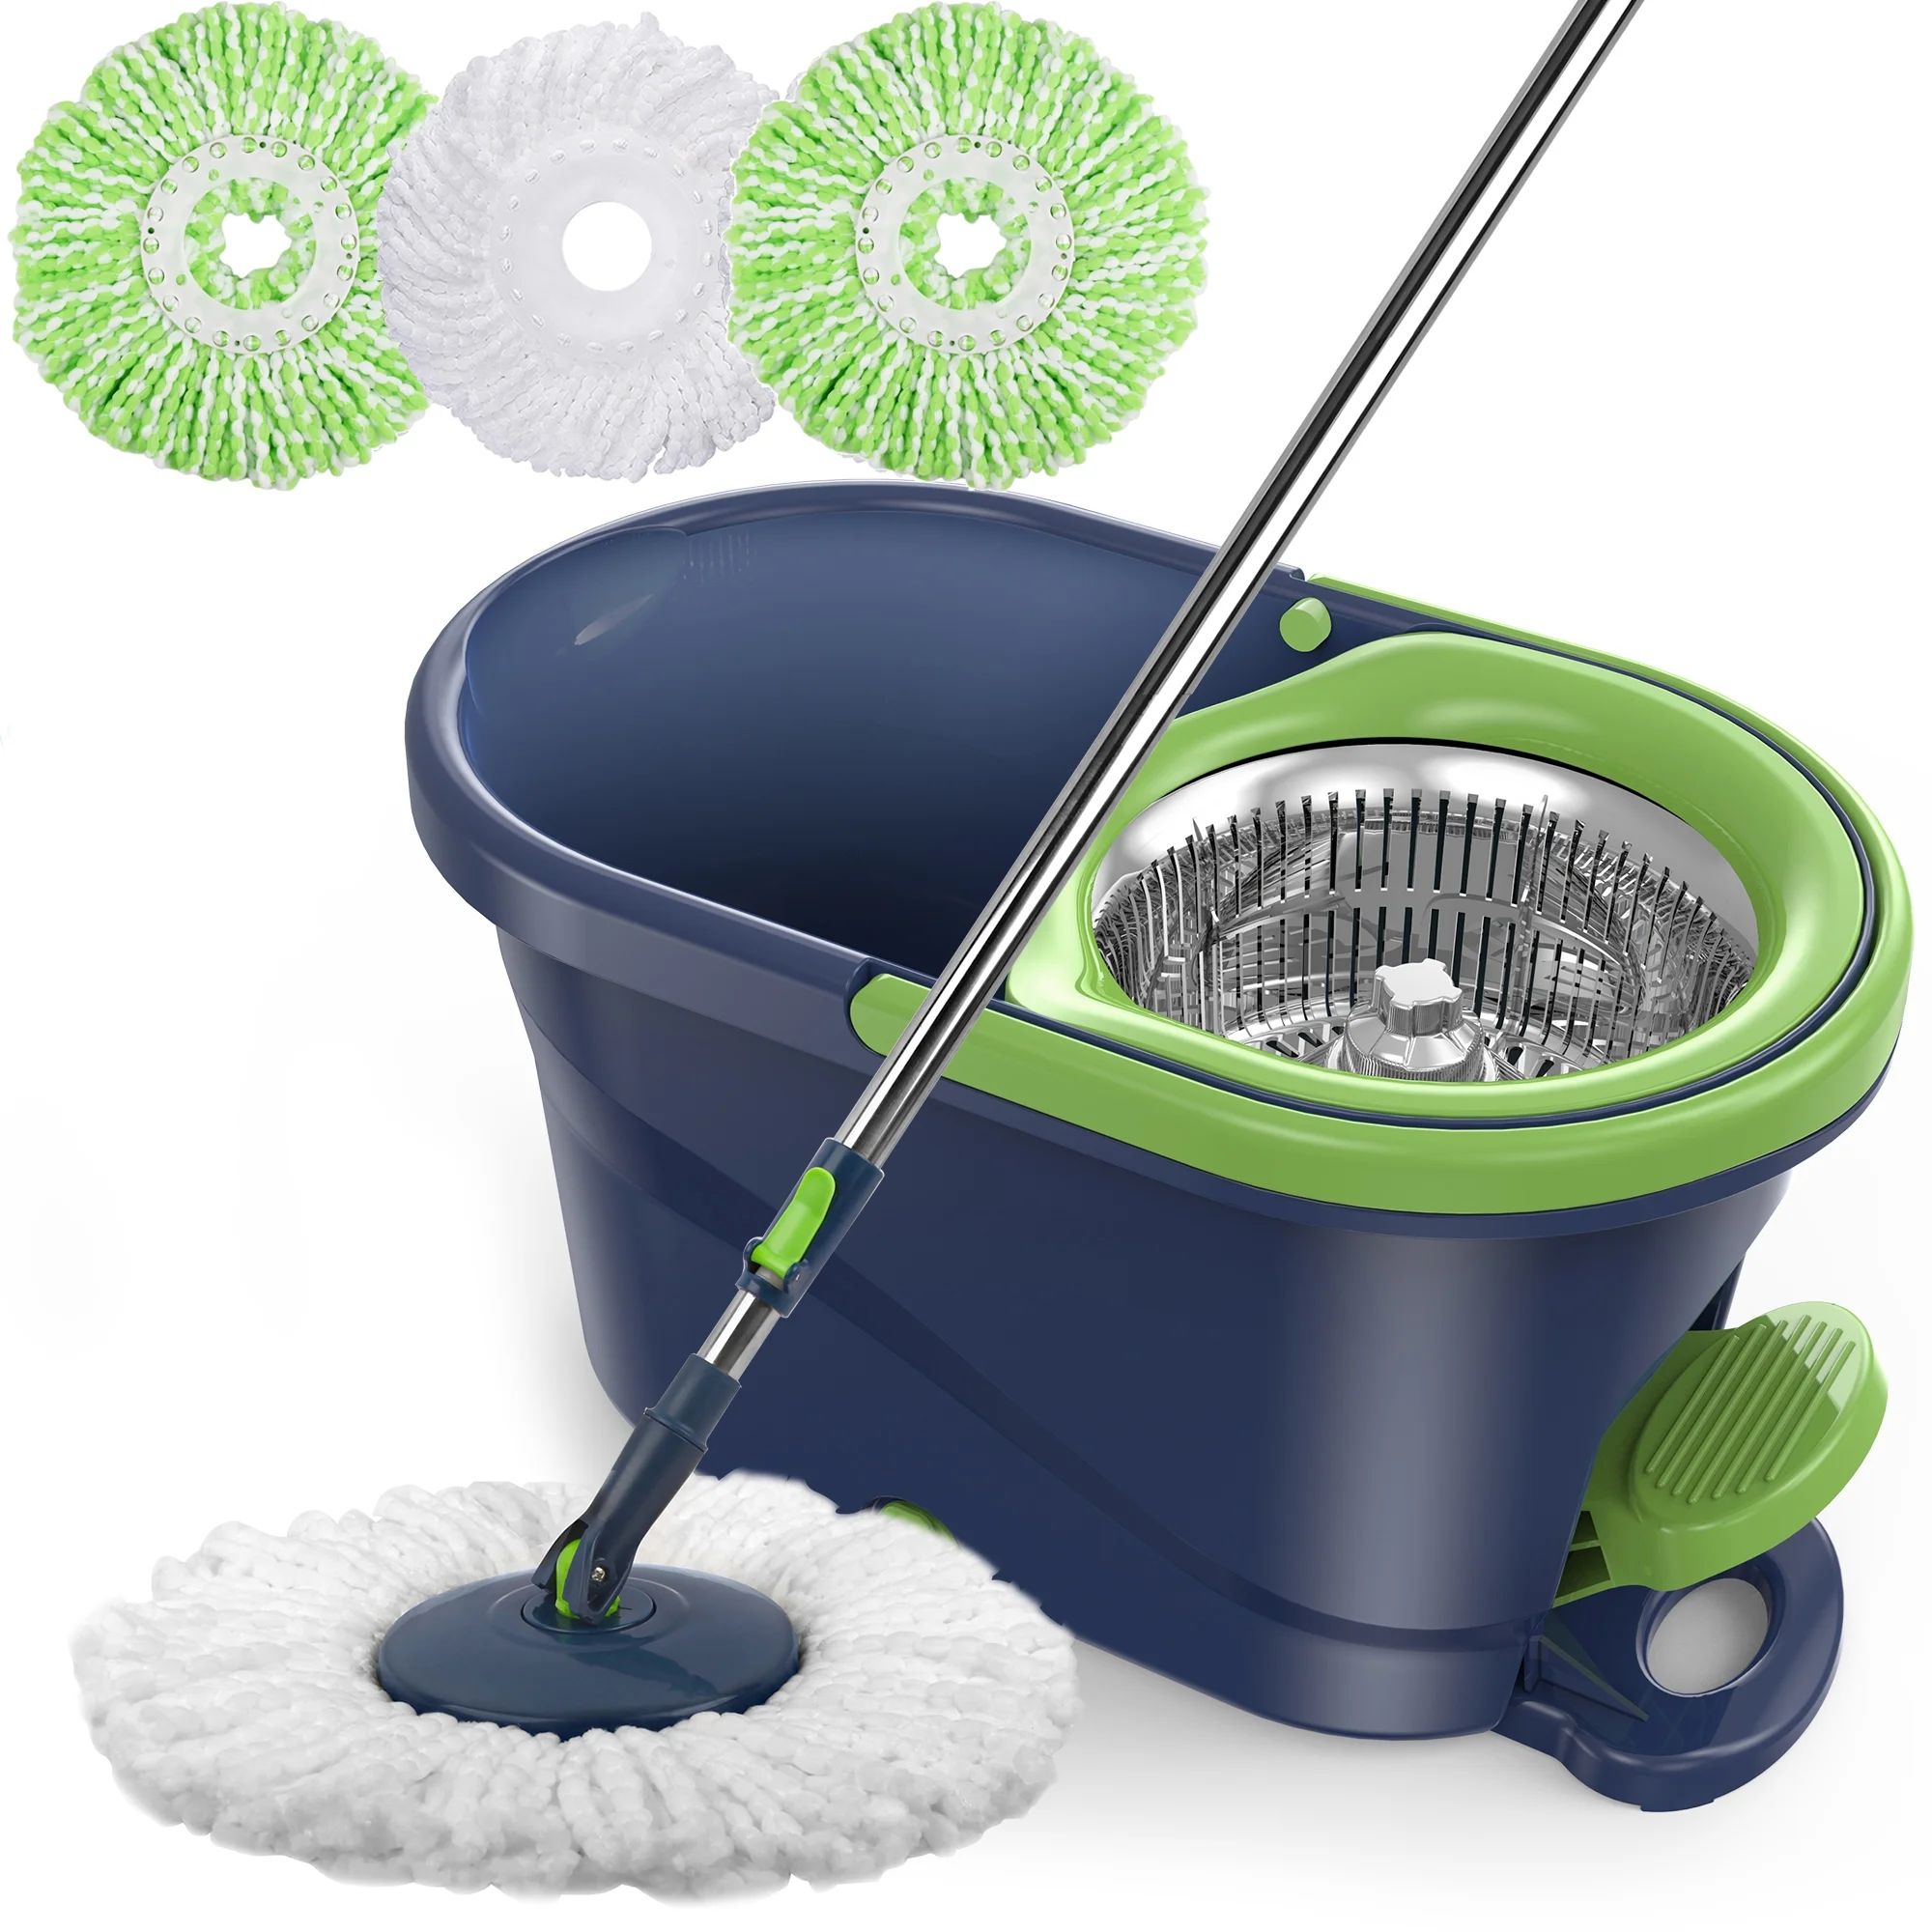 SUGARDAY Spin Mop and Bucket with Wringer Set for Floors Cleaning Heavy duty System, Green - Walm... | Walmart (US)